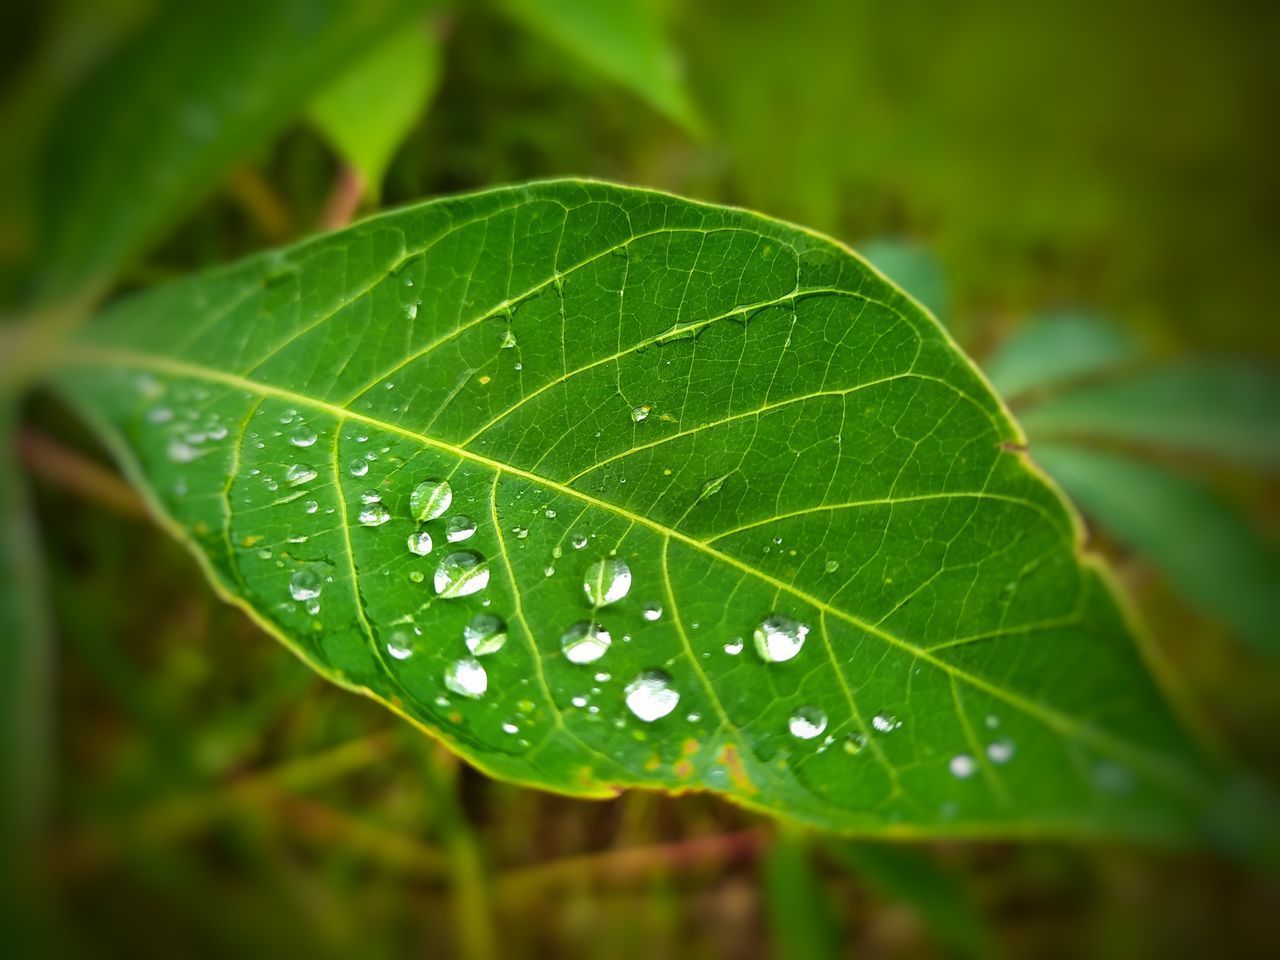 CLOSE-UP OF WATER DROPS ON LEAF